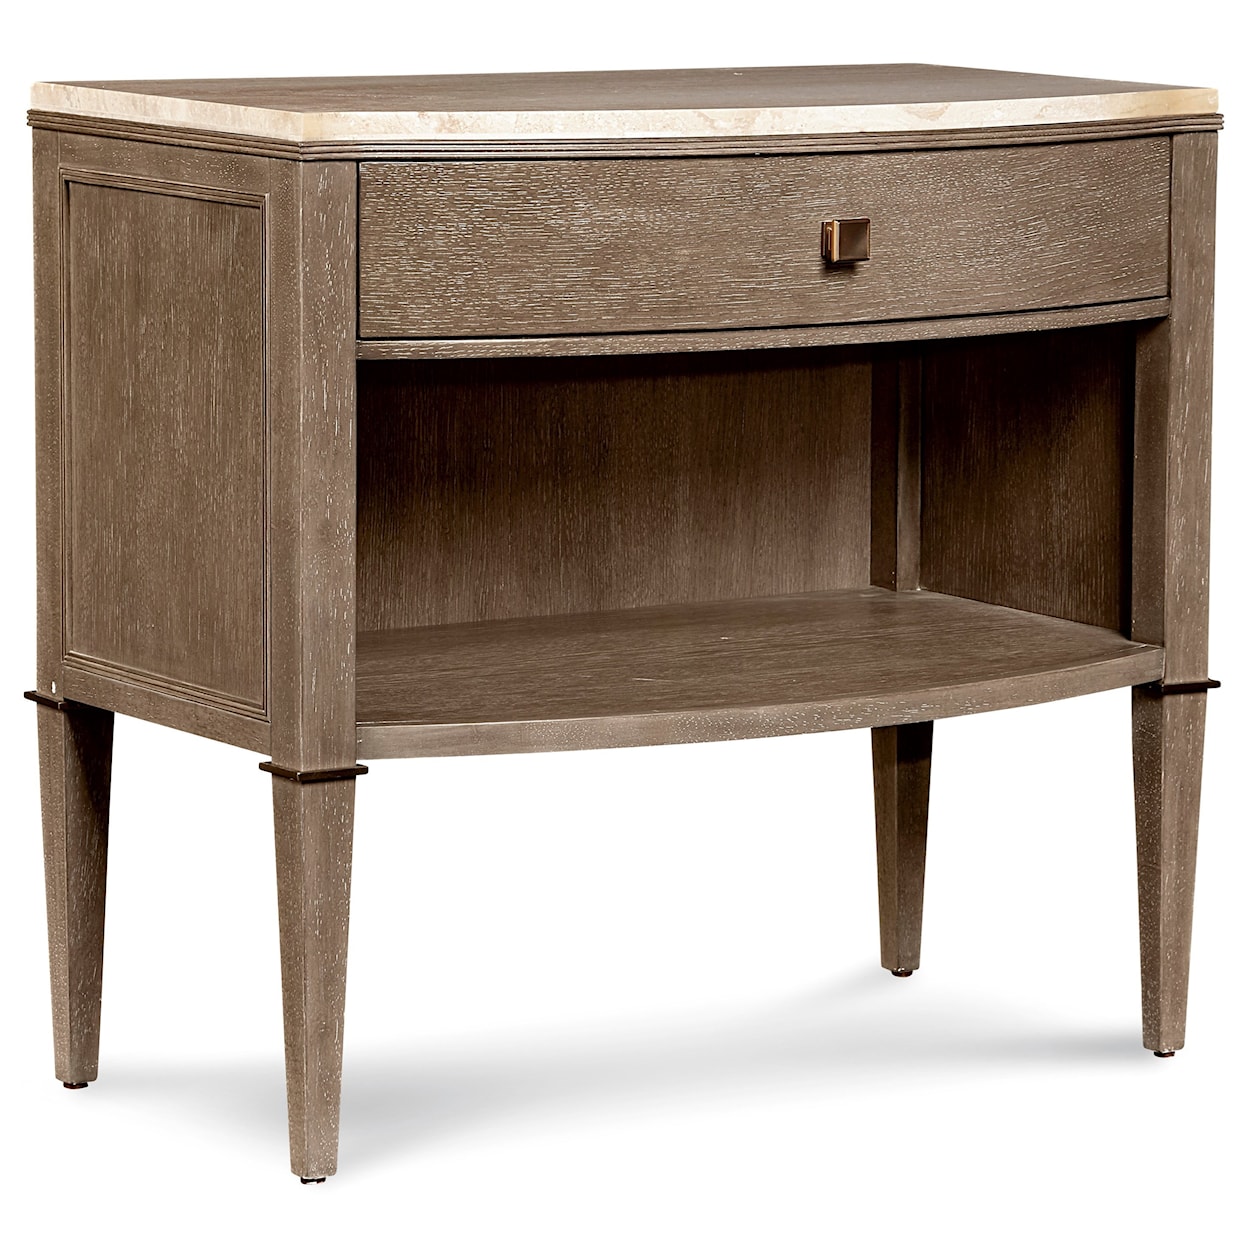 A.R.T. Furniture Inc Cityscapes Ellis Leg Nightstand